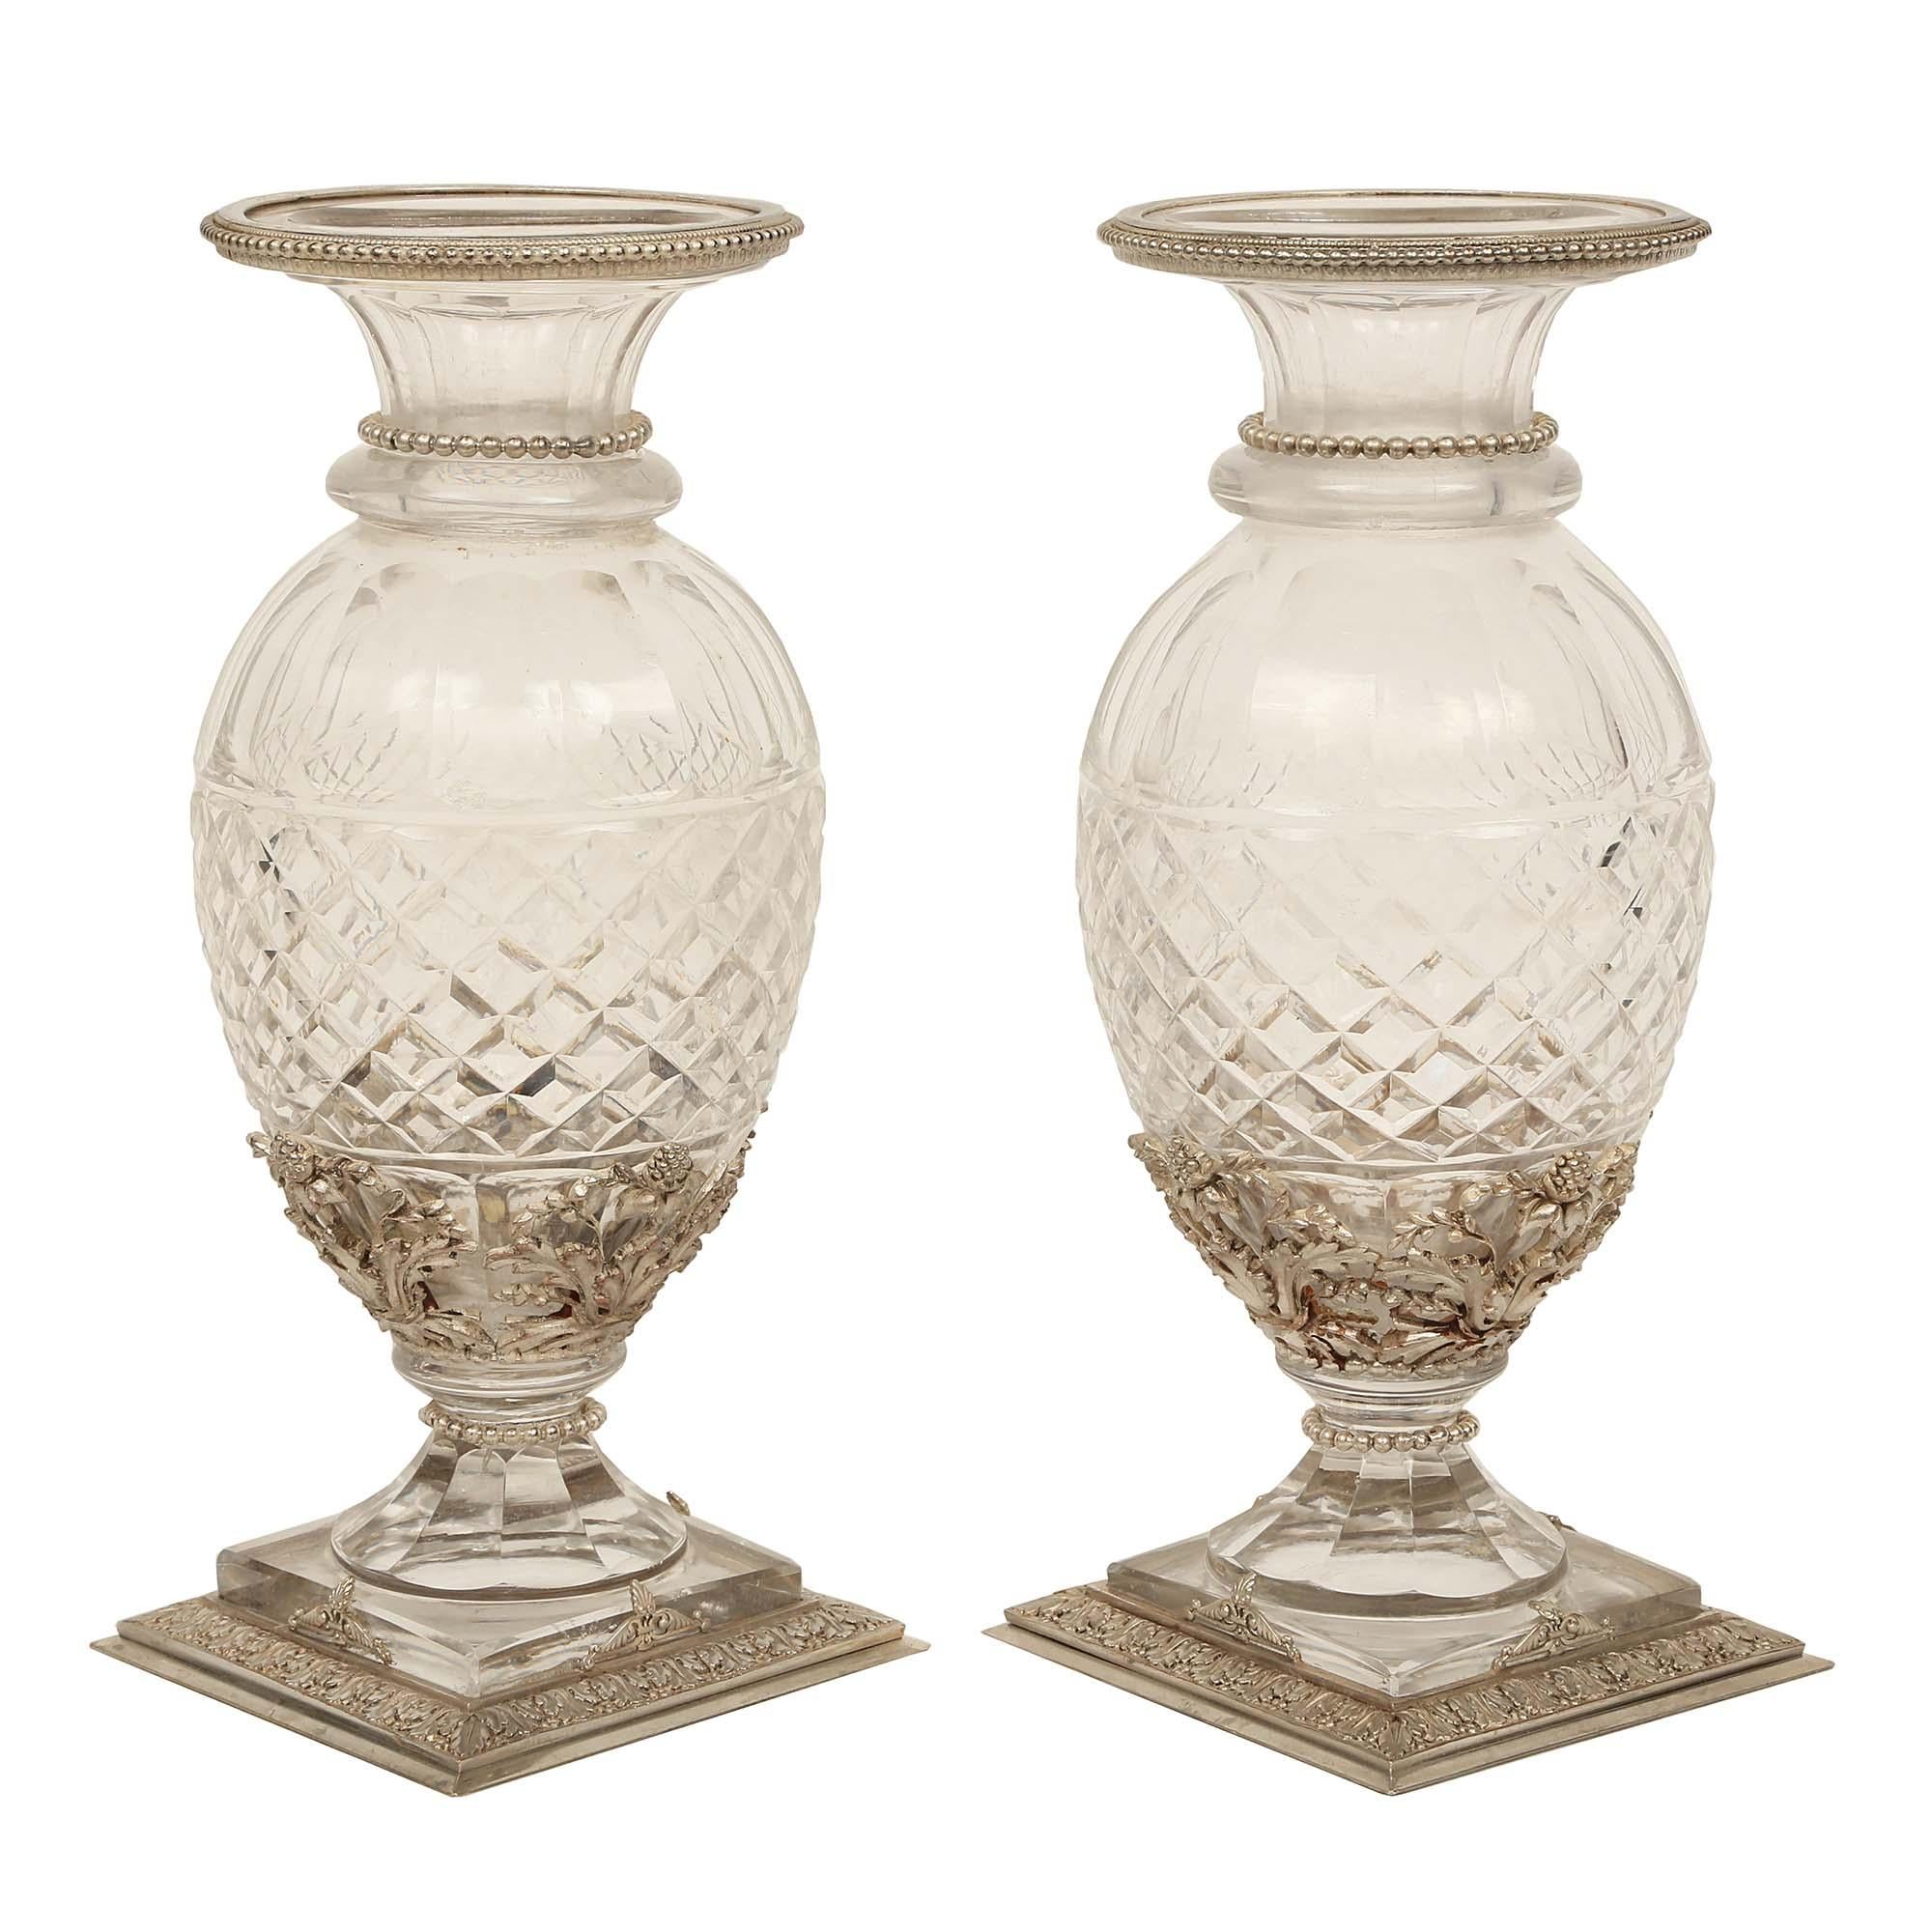 An elegant pair of French Louis XVI st. Baccarat cut crystal and silvered bronze vases. Each vase is raised by a chased square silvered bronze base decorated by chased acanthus leaves below the crystal socle pedestal. The square cut crystal body is